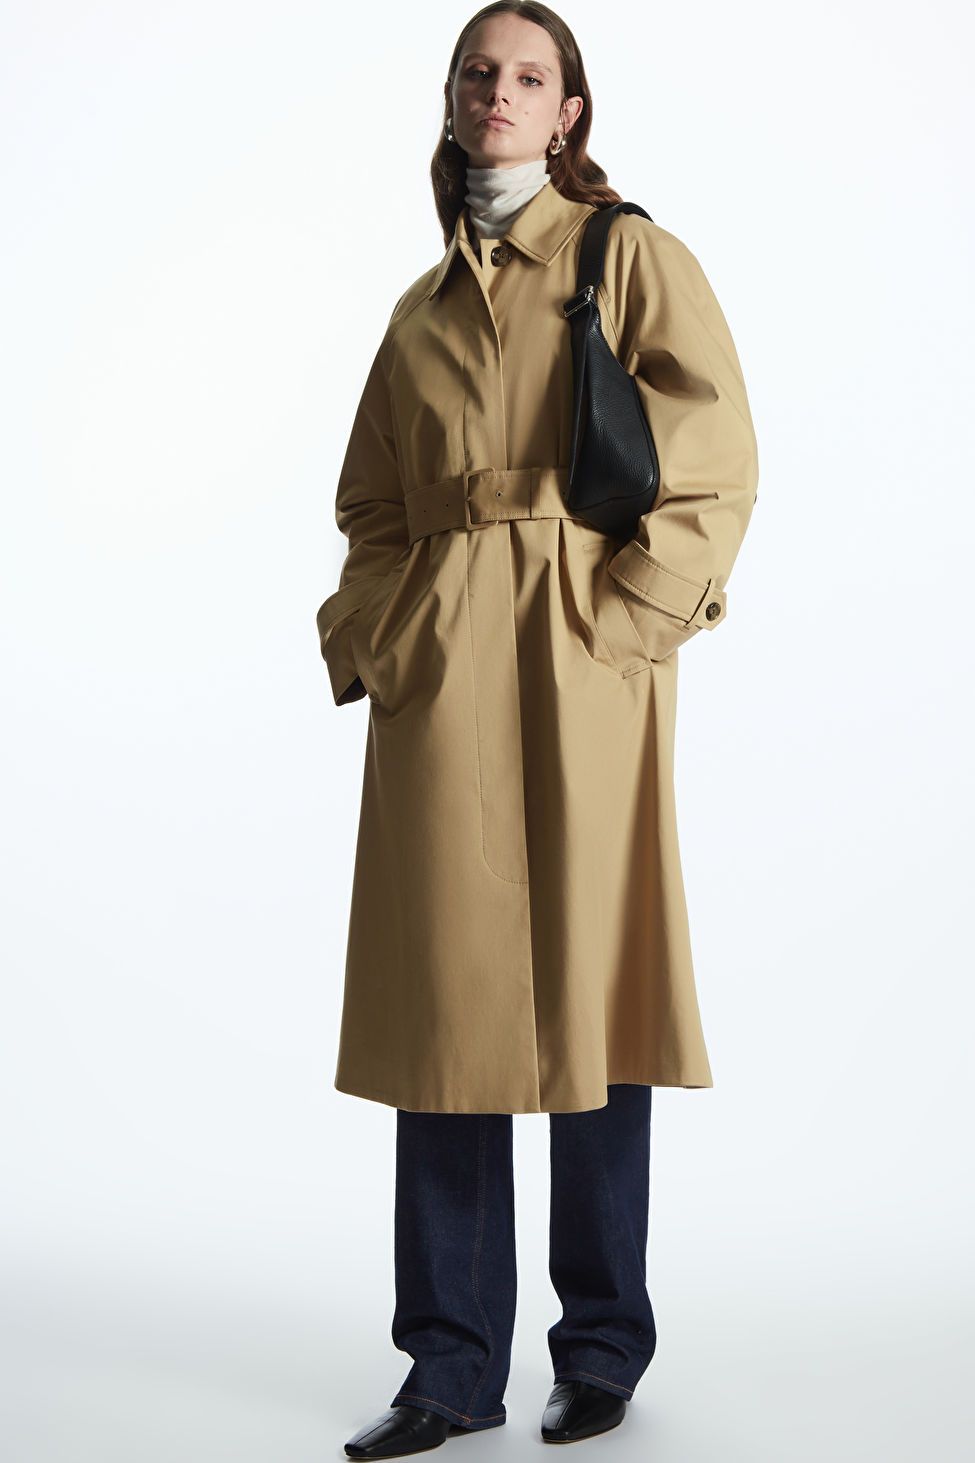 REGULAR-FIT TWILL TRENCH COAT
                        
						$250
	                           		
... | COS (US)